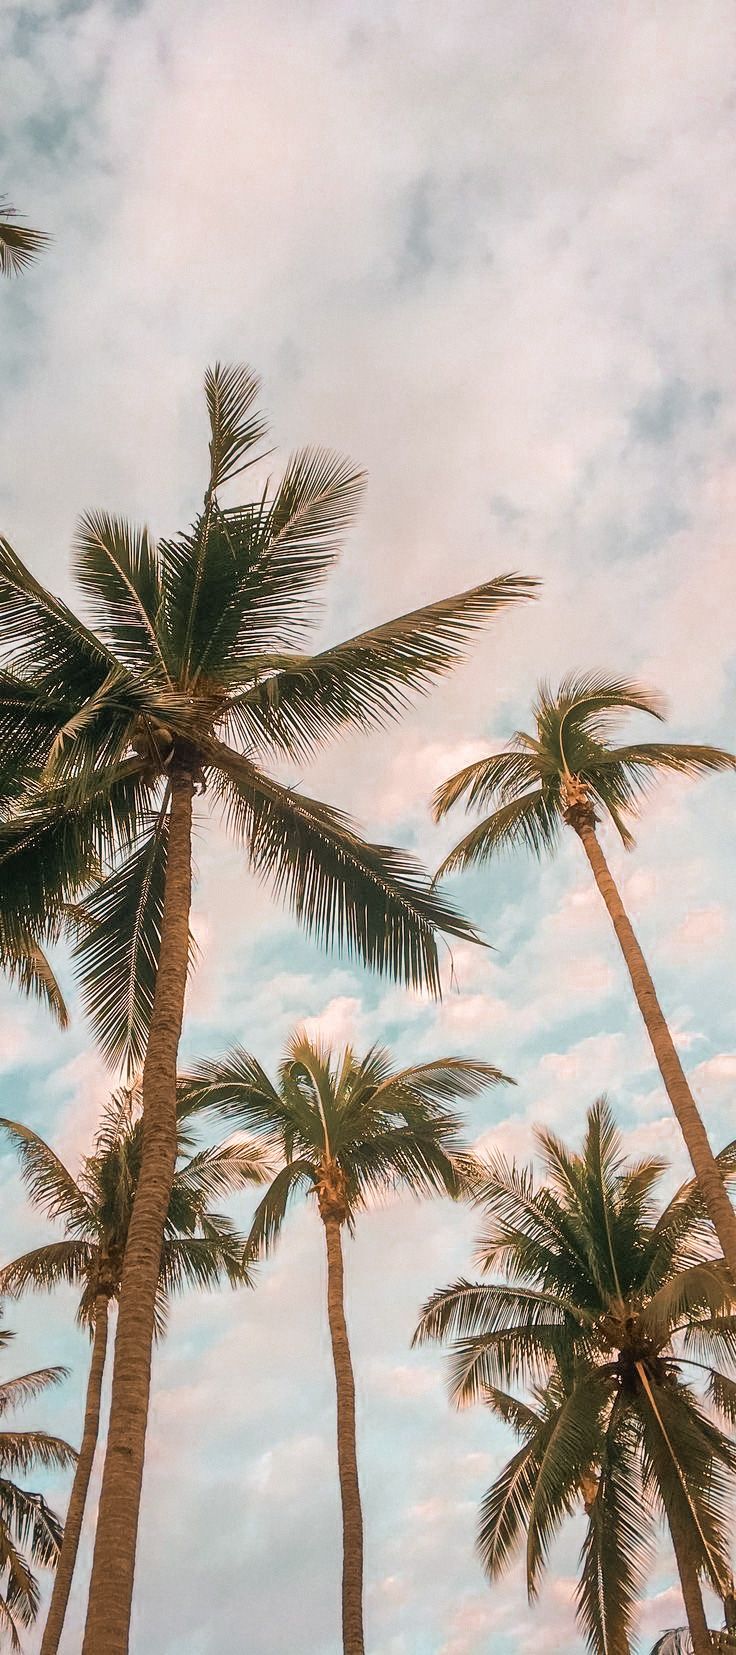 Pin by cecile watel on wallpapers palm tree photography palm trees wallpaper tree wallpapâ tree wallpaper iphone beach wallpaper iphone palm trees wallpaper